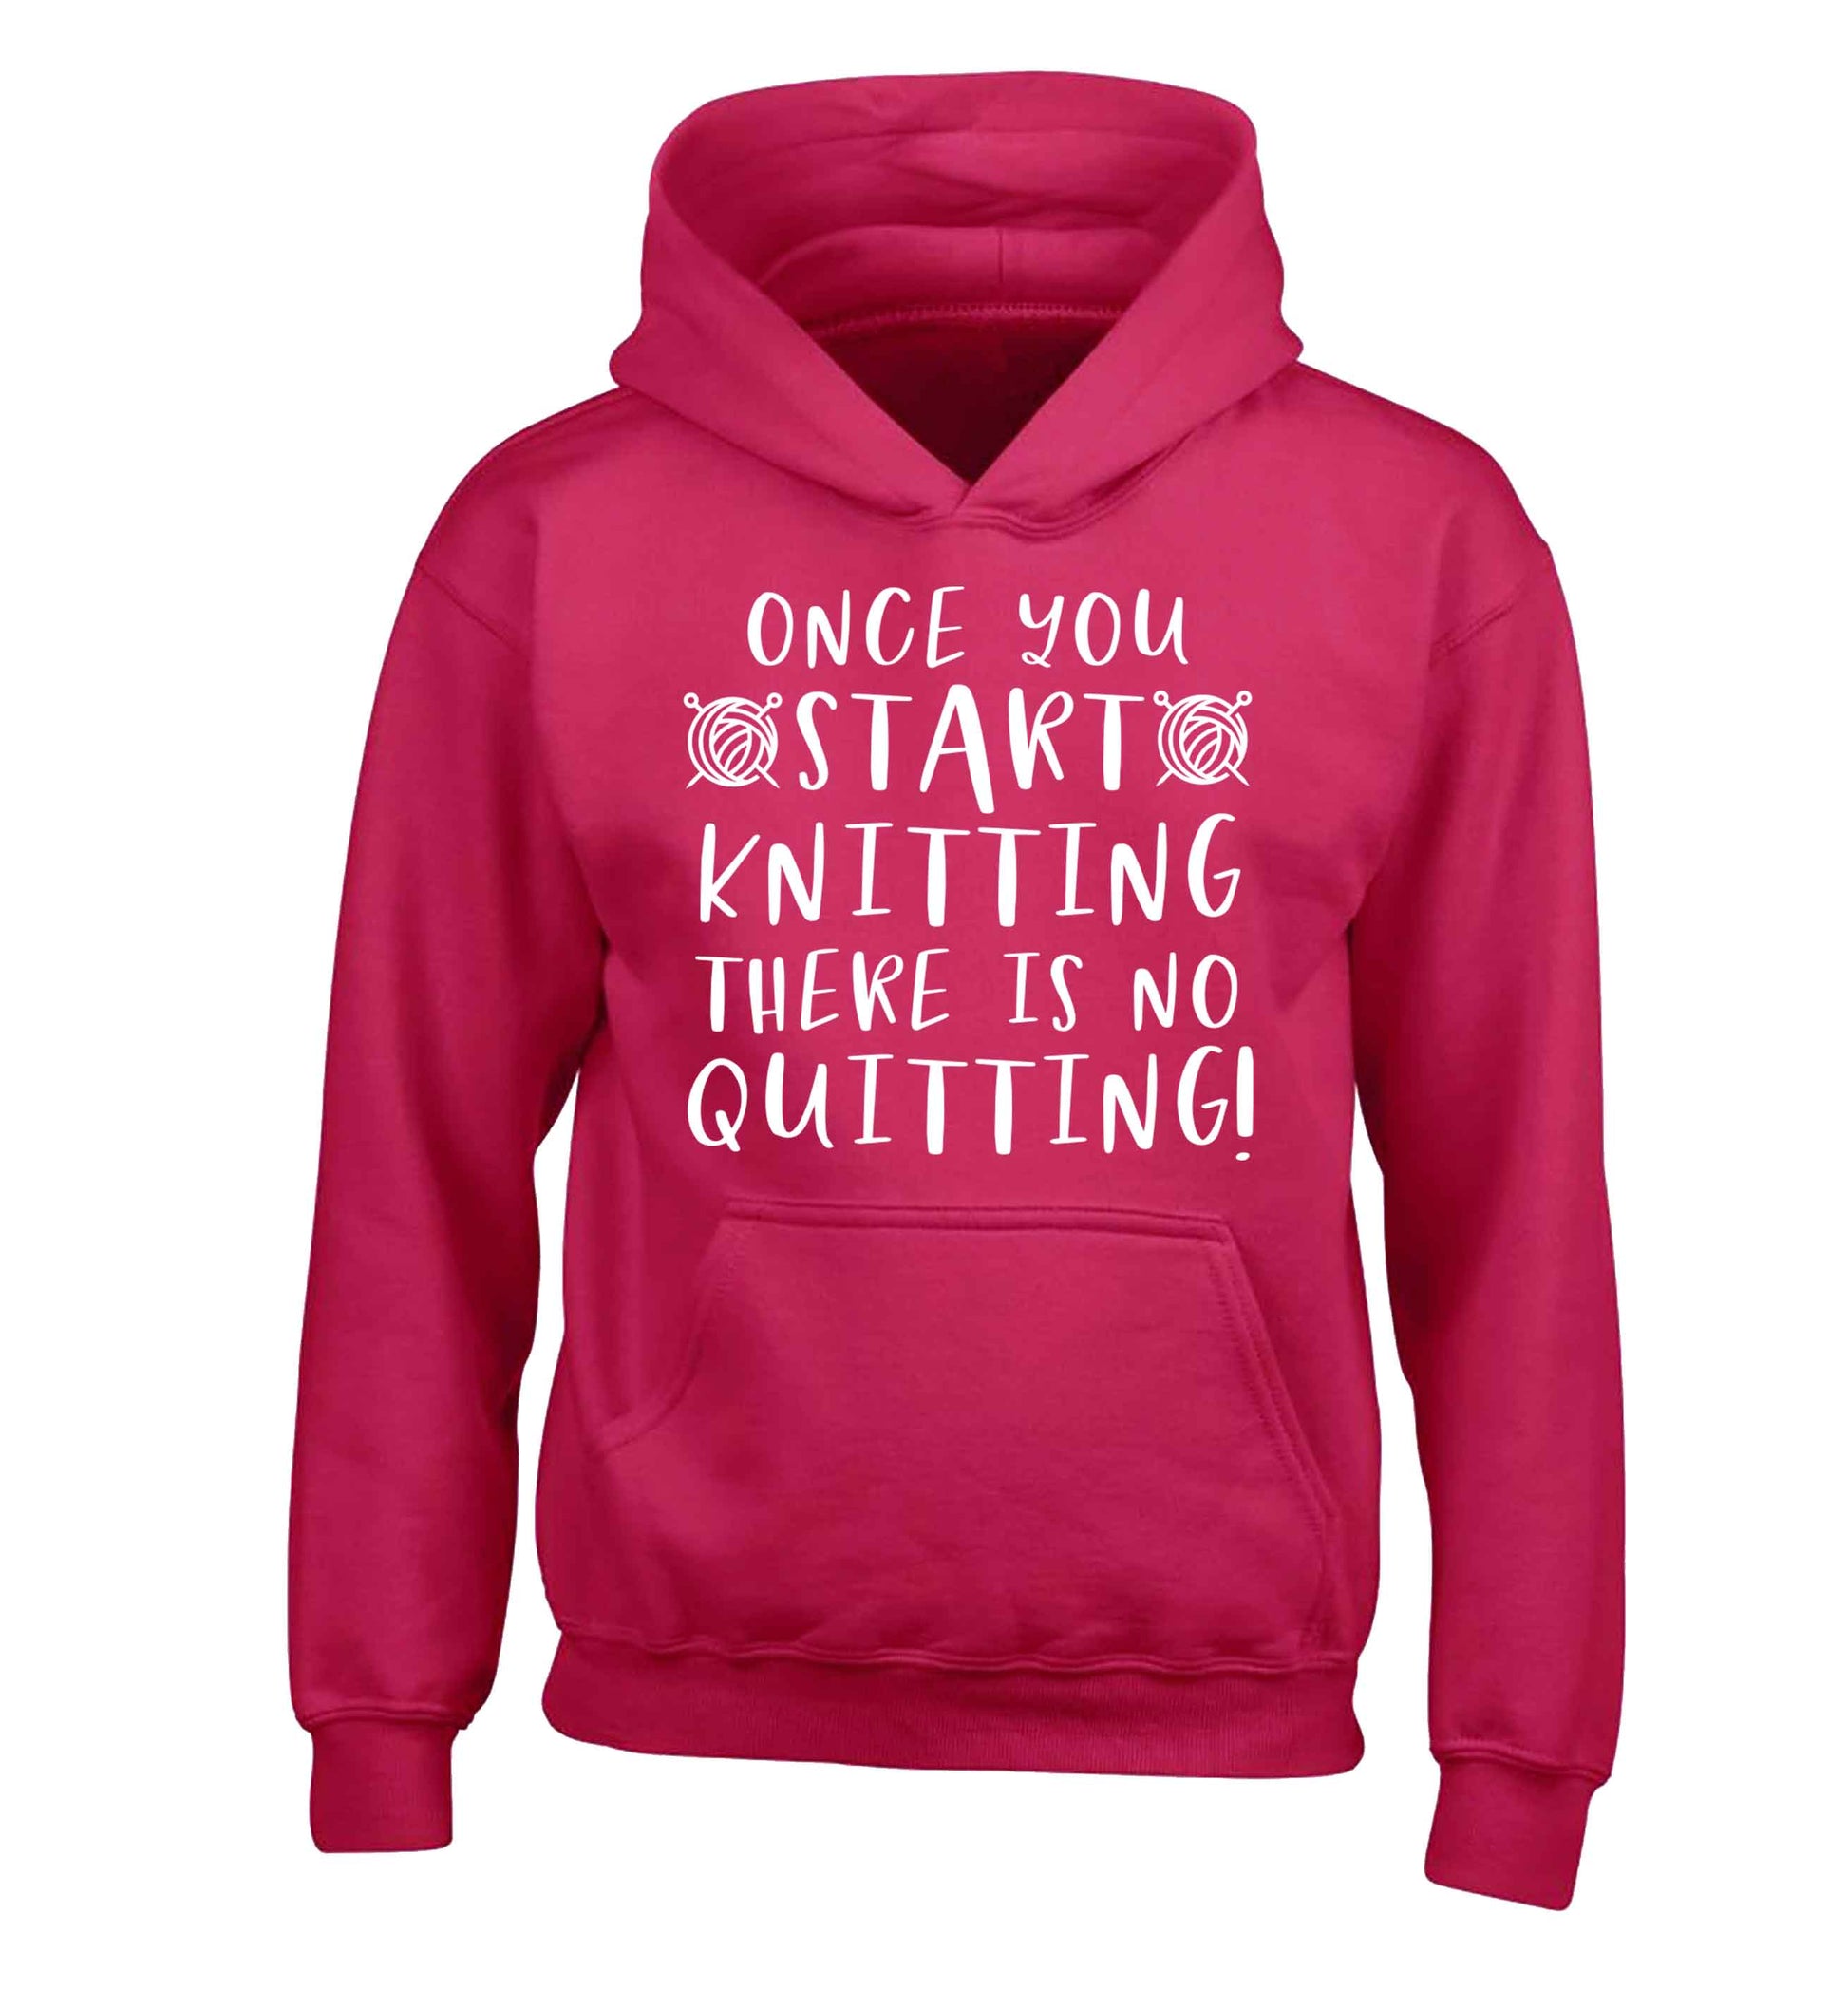 Once you start knitting there is no quitting! children's pink hoodie 12-13 Years